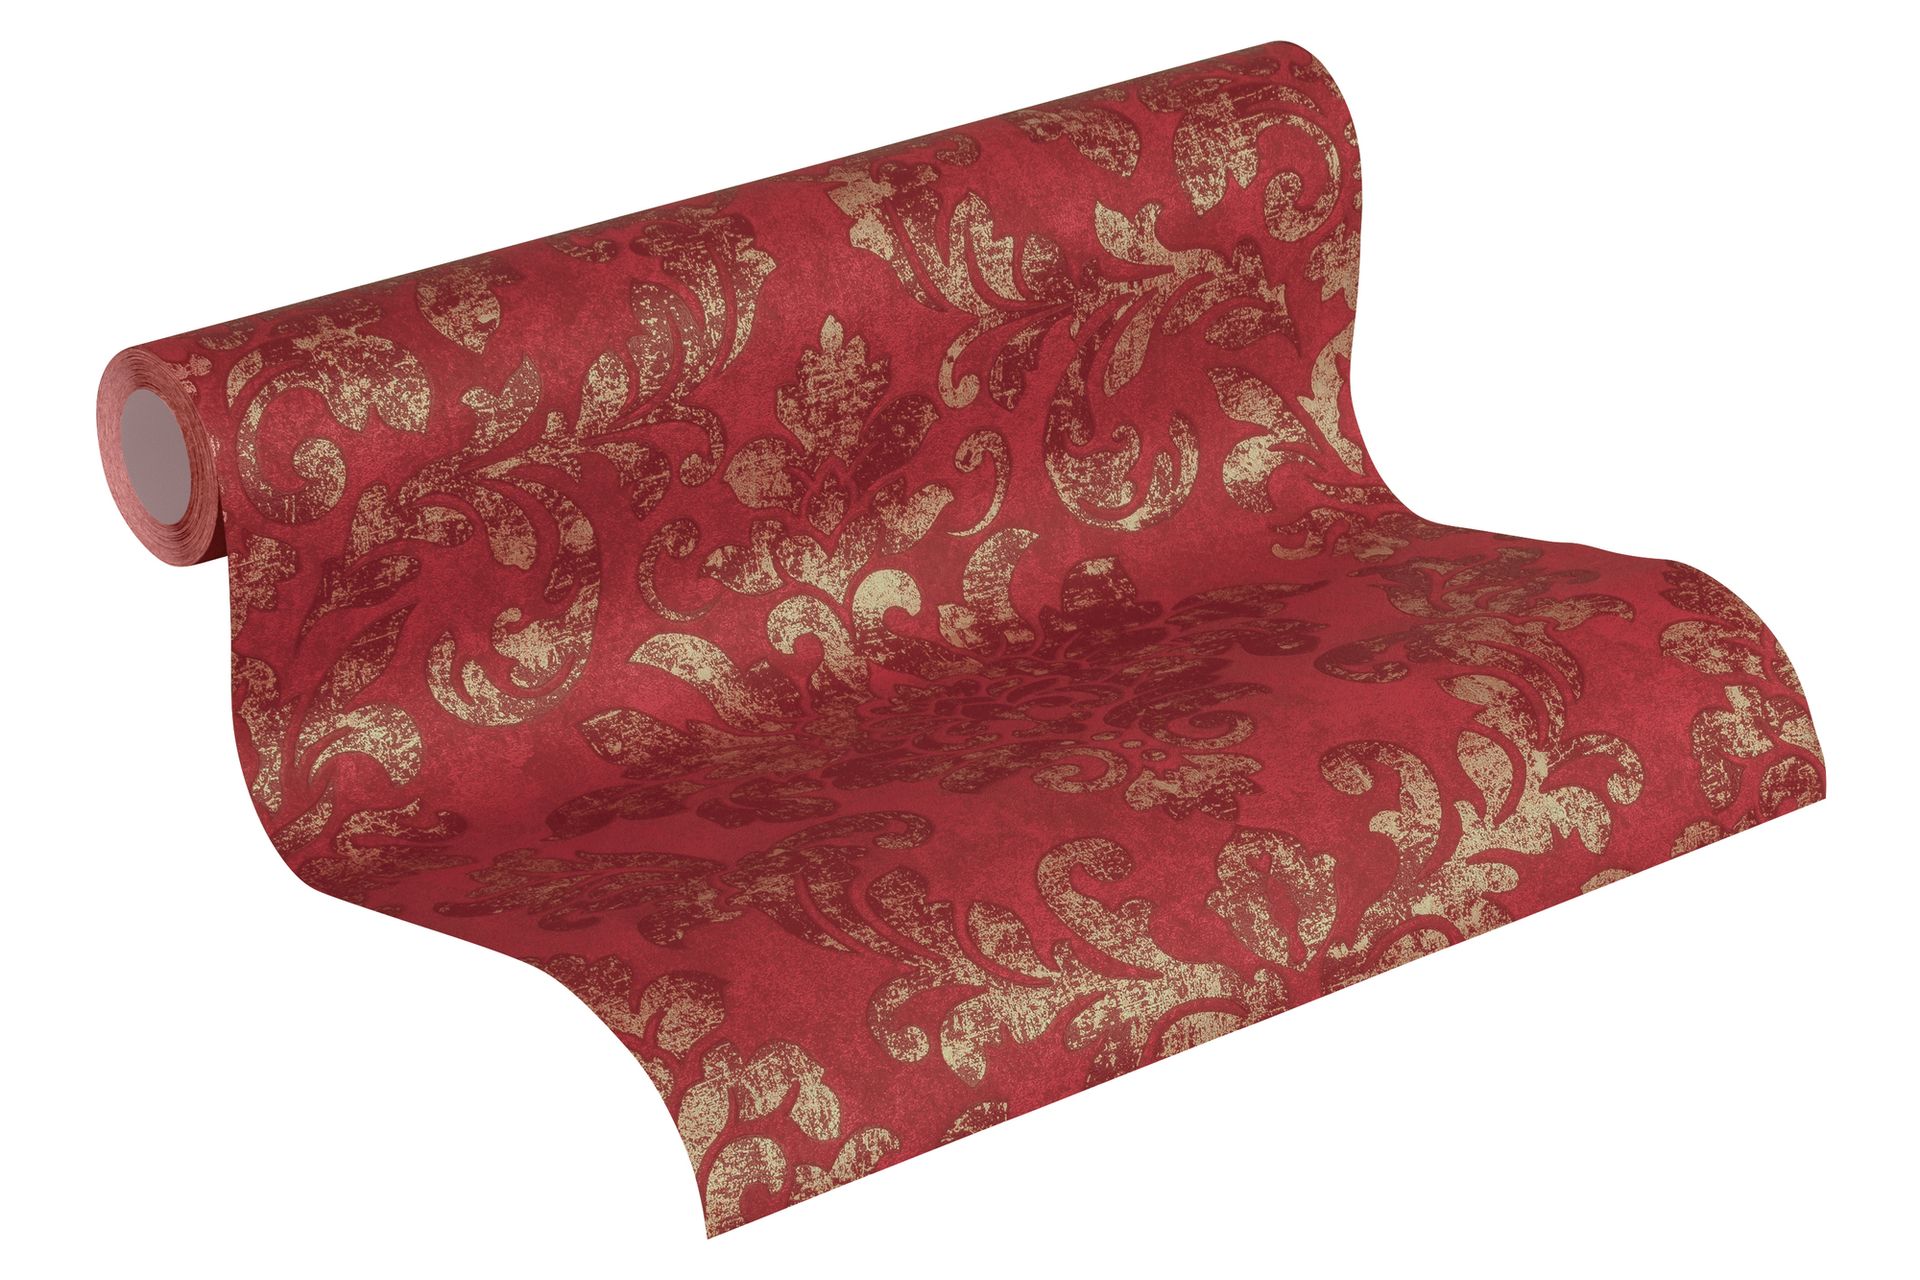 A.S. Création Neue Bude 2.0 Edition 2, Barock Tapete, rot, gold 374131